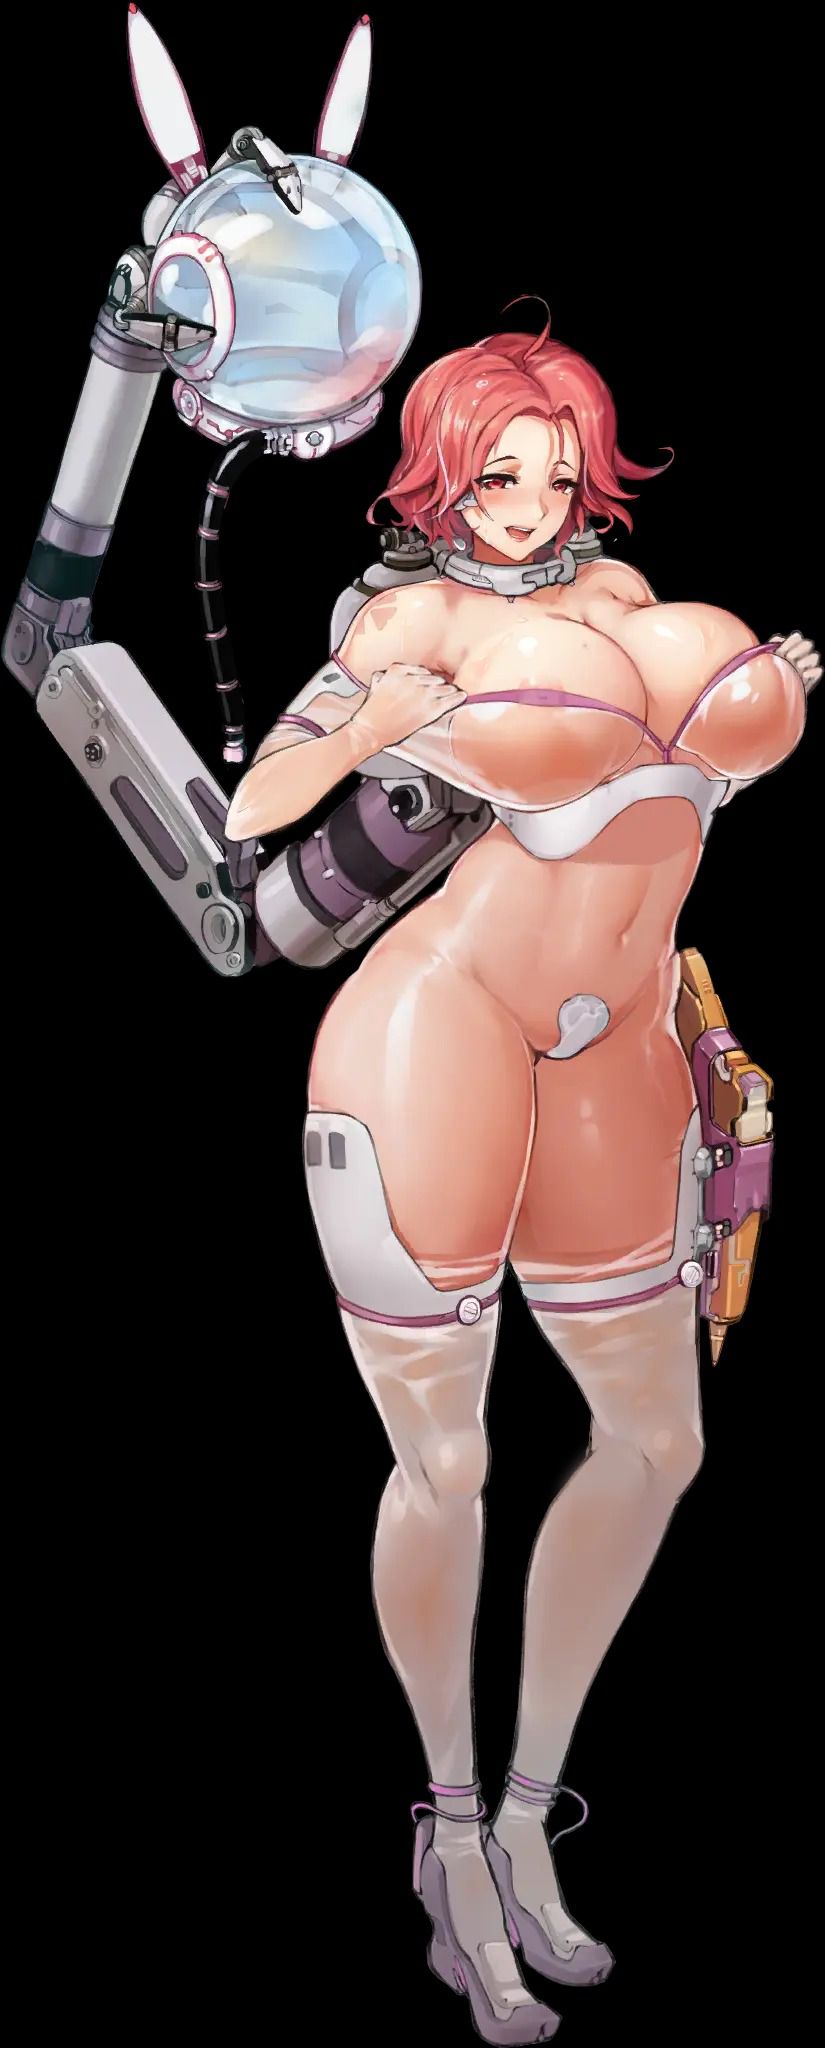 Smartphone game "The costume of the new character is a skim exposure degree last minute! ! Can you see your nipples? 5